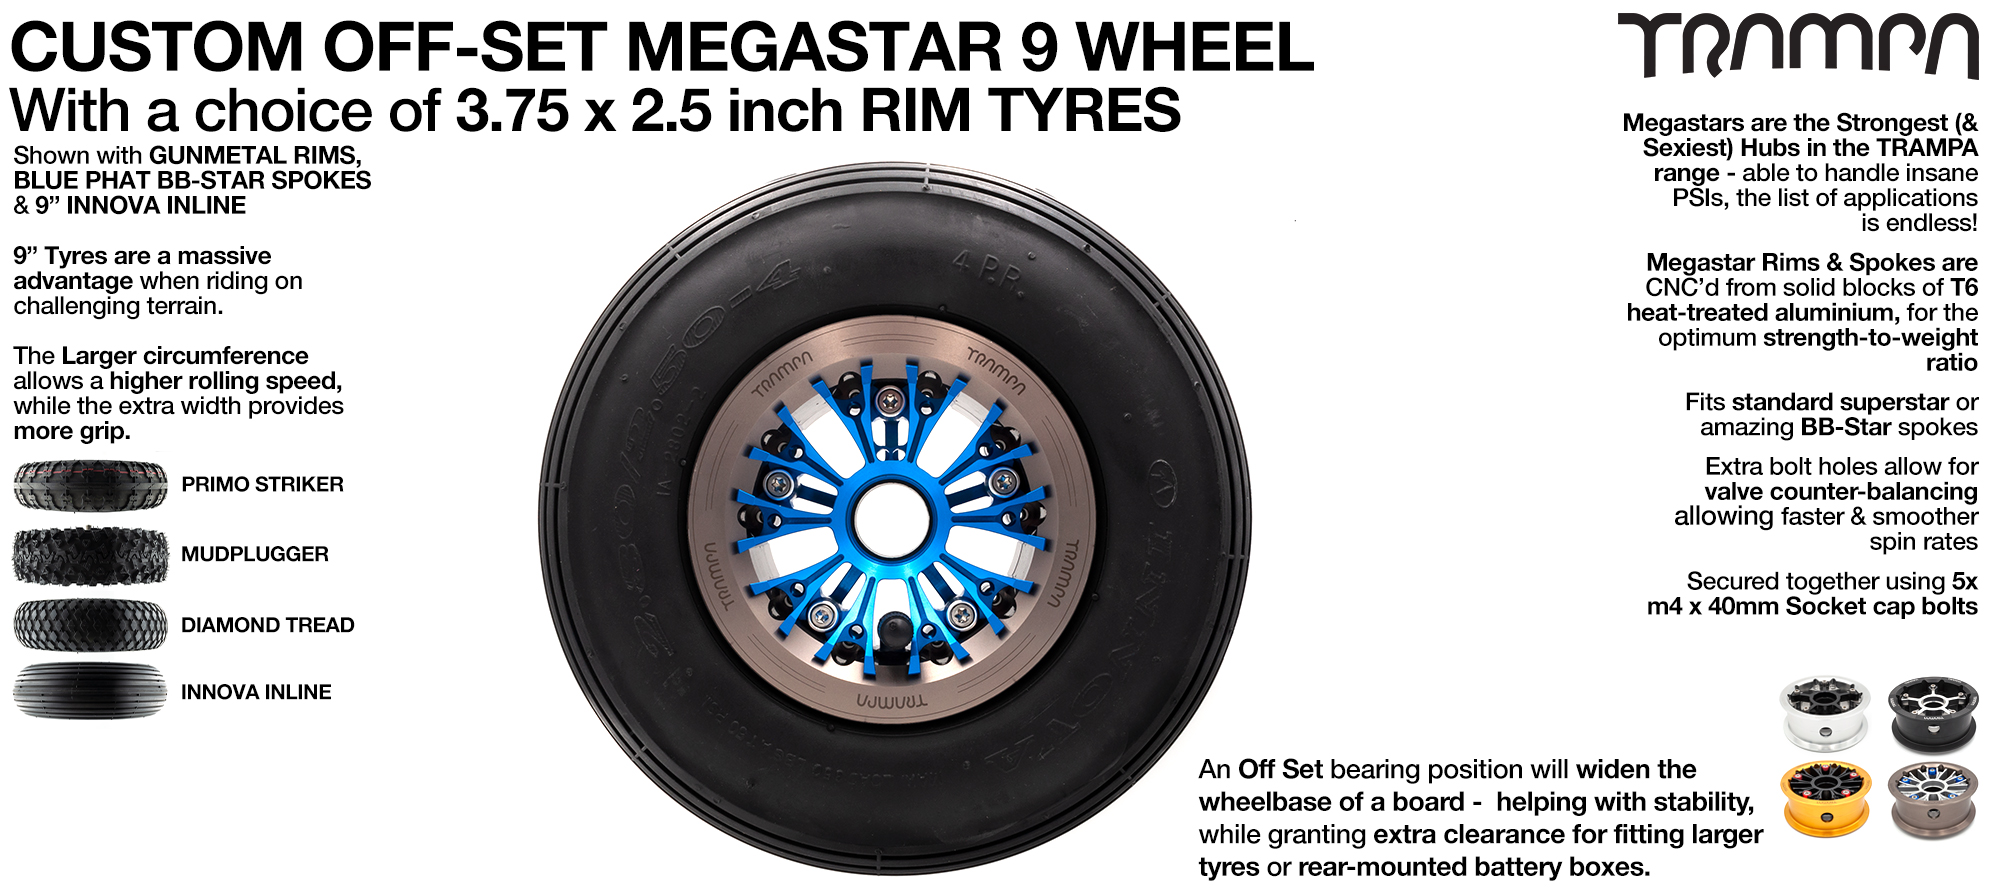 OFF-SET MEGASTAR 9 WHEEL - Fits from 6 - 10 Inch Tyres - 3.75/4 x 2.5 Inch 